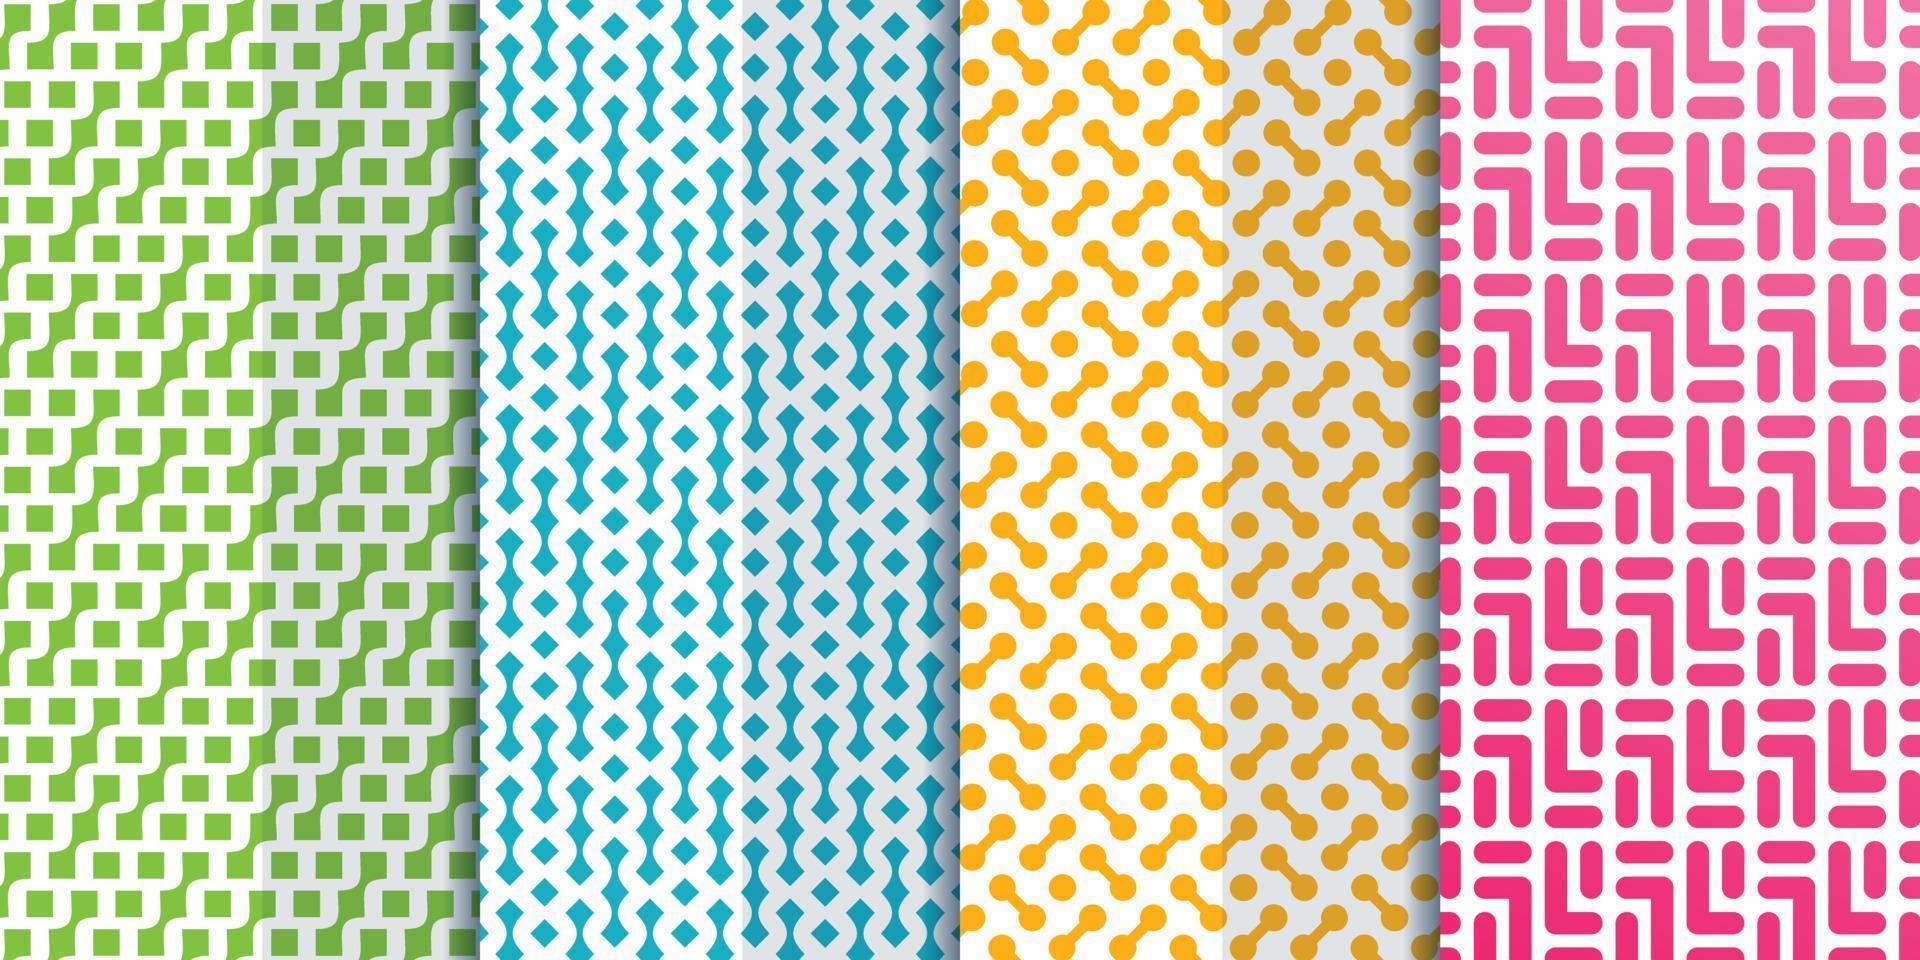 Textured wrapping textile decorative pattern vector